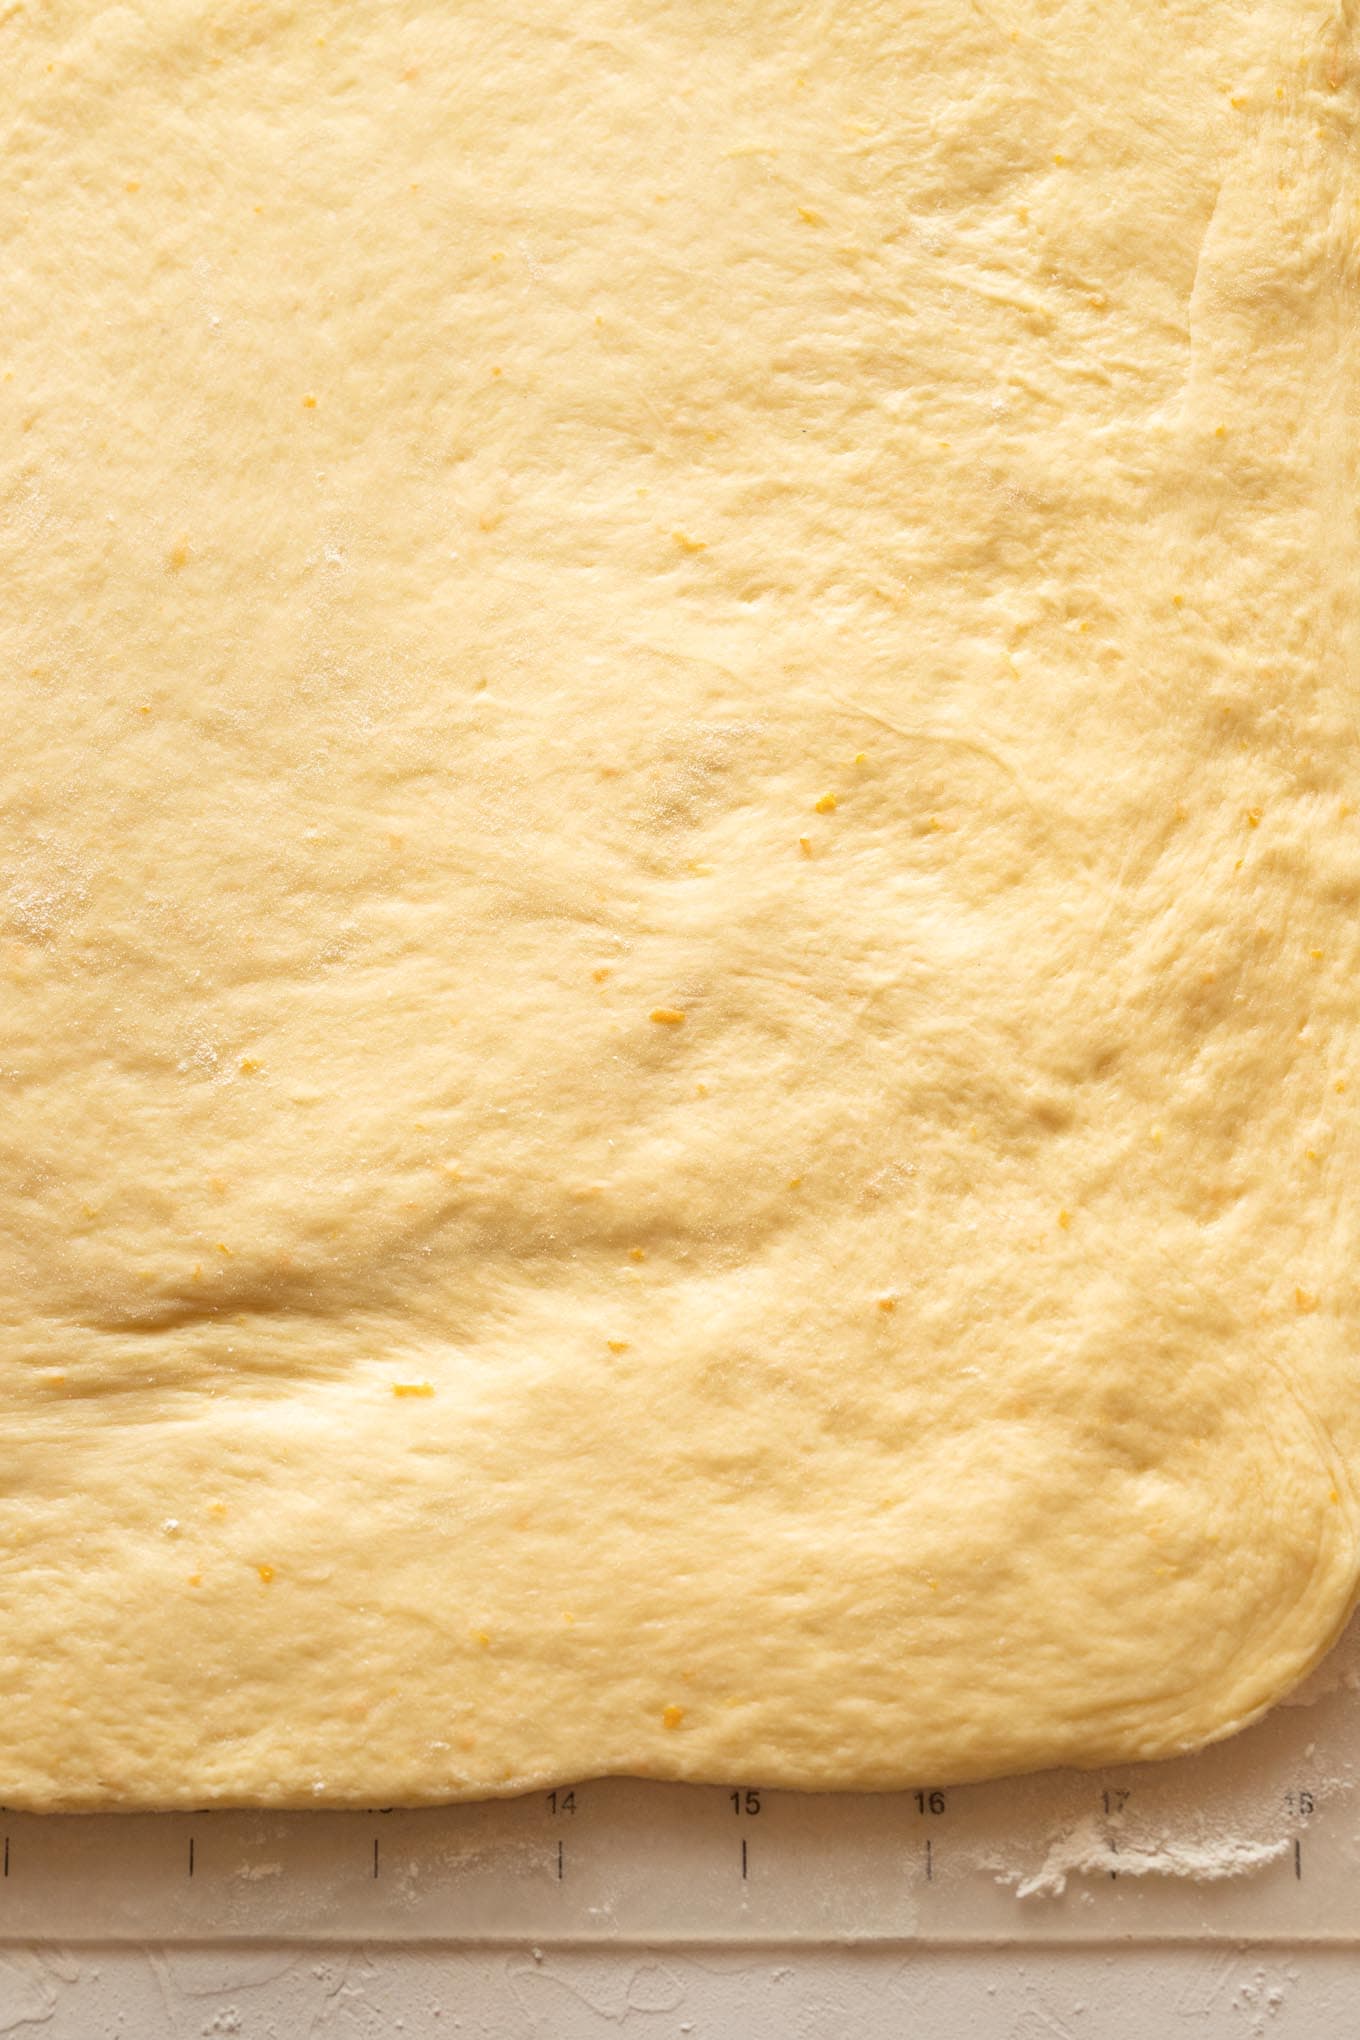 Close up of rolled out bread dough with visible flecks of orange zest.